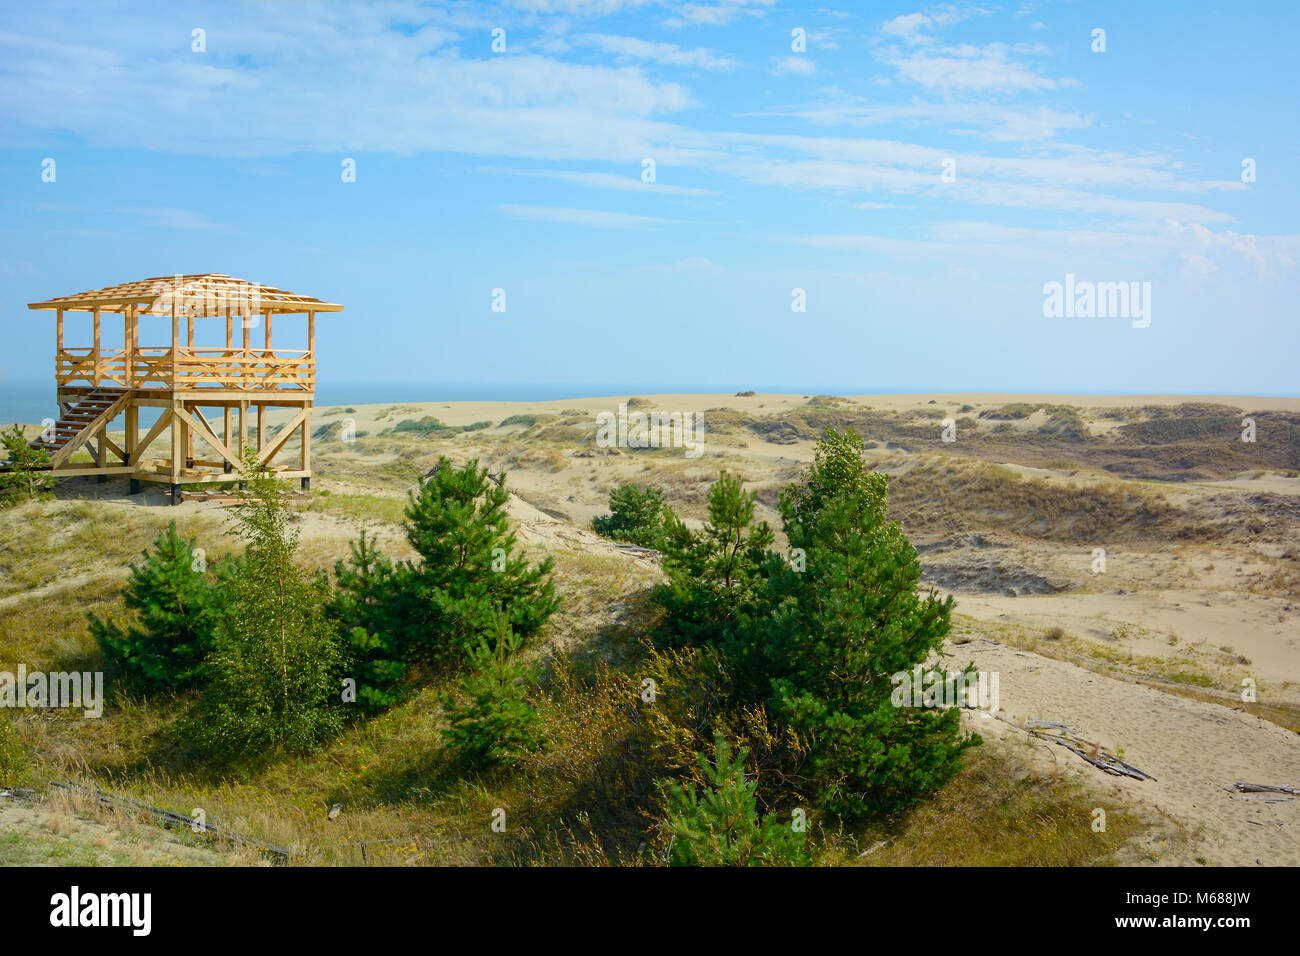 The observation deck on the sand dune, Curonian spit, Kaliningrad region Stock Photo